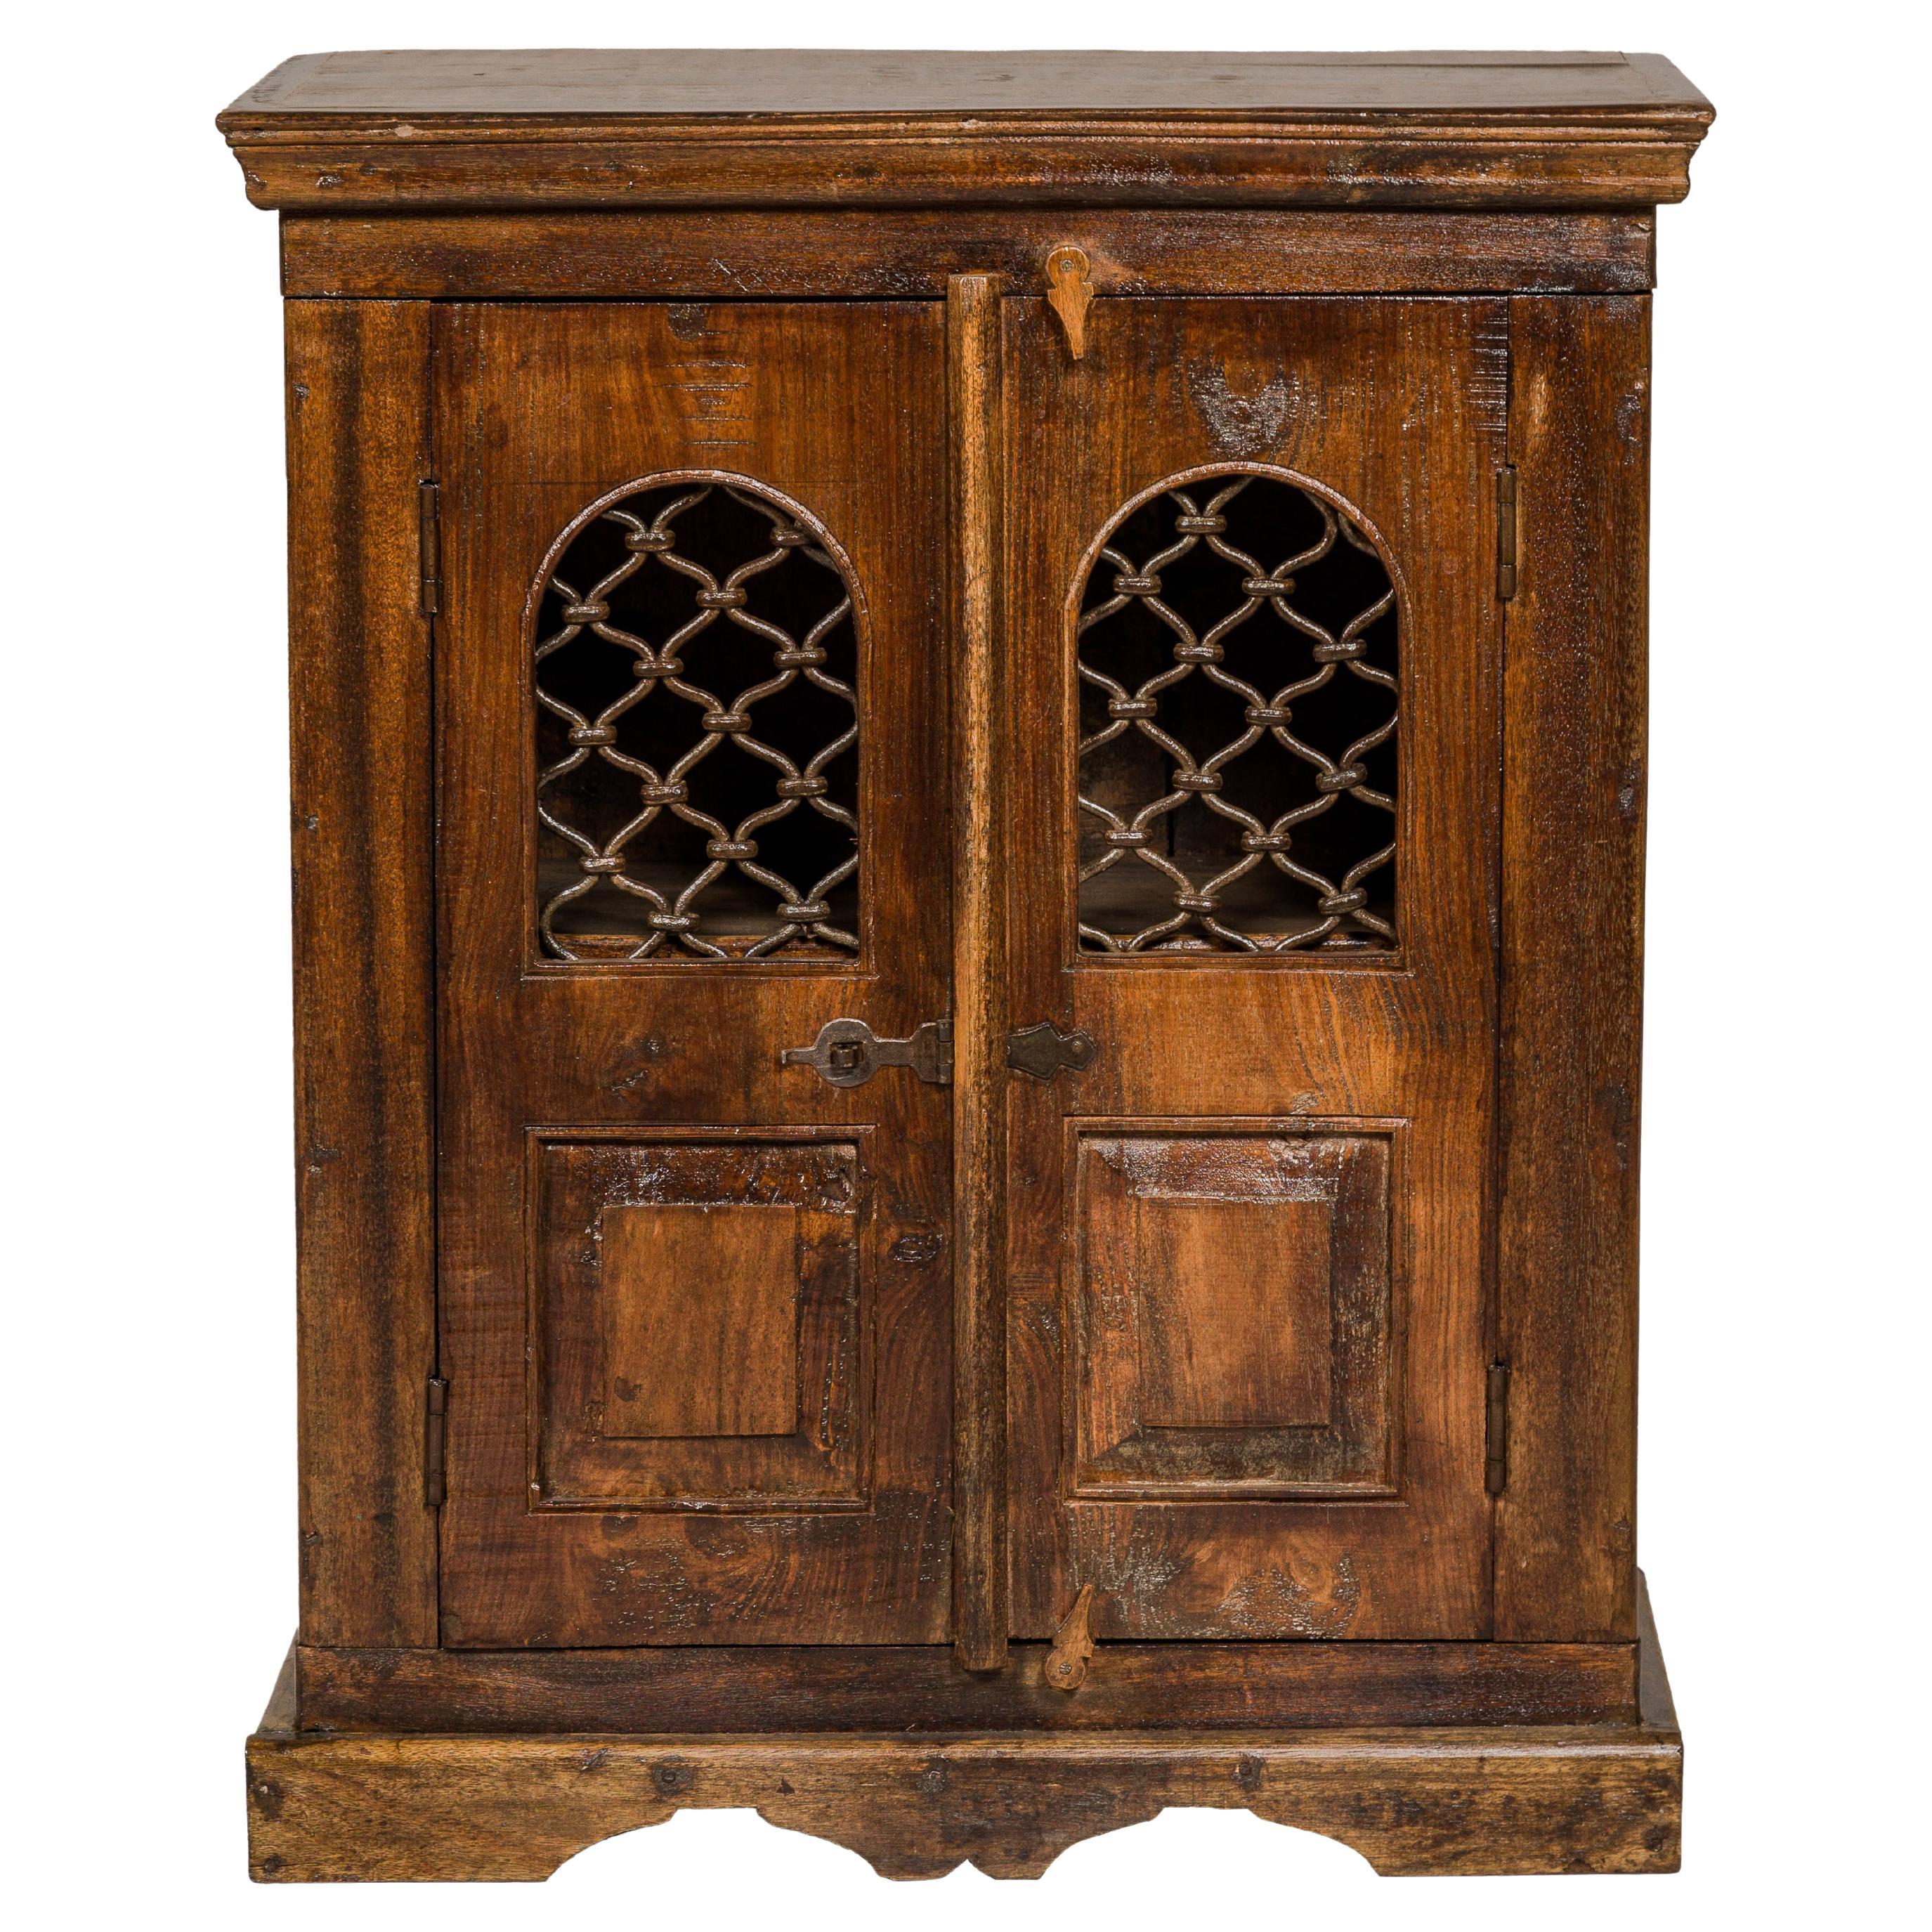 Indian 19th Century Wooden Side Cabinet with Arched Metal Grate Window Door For Sale